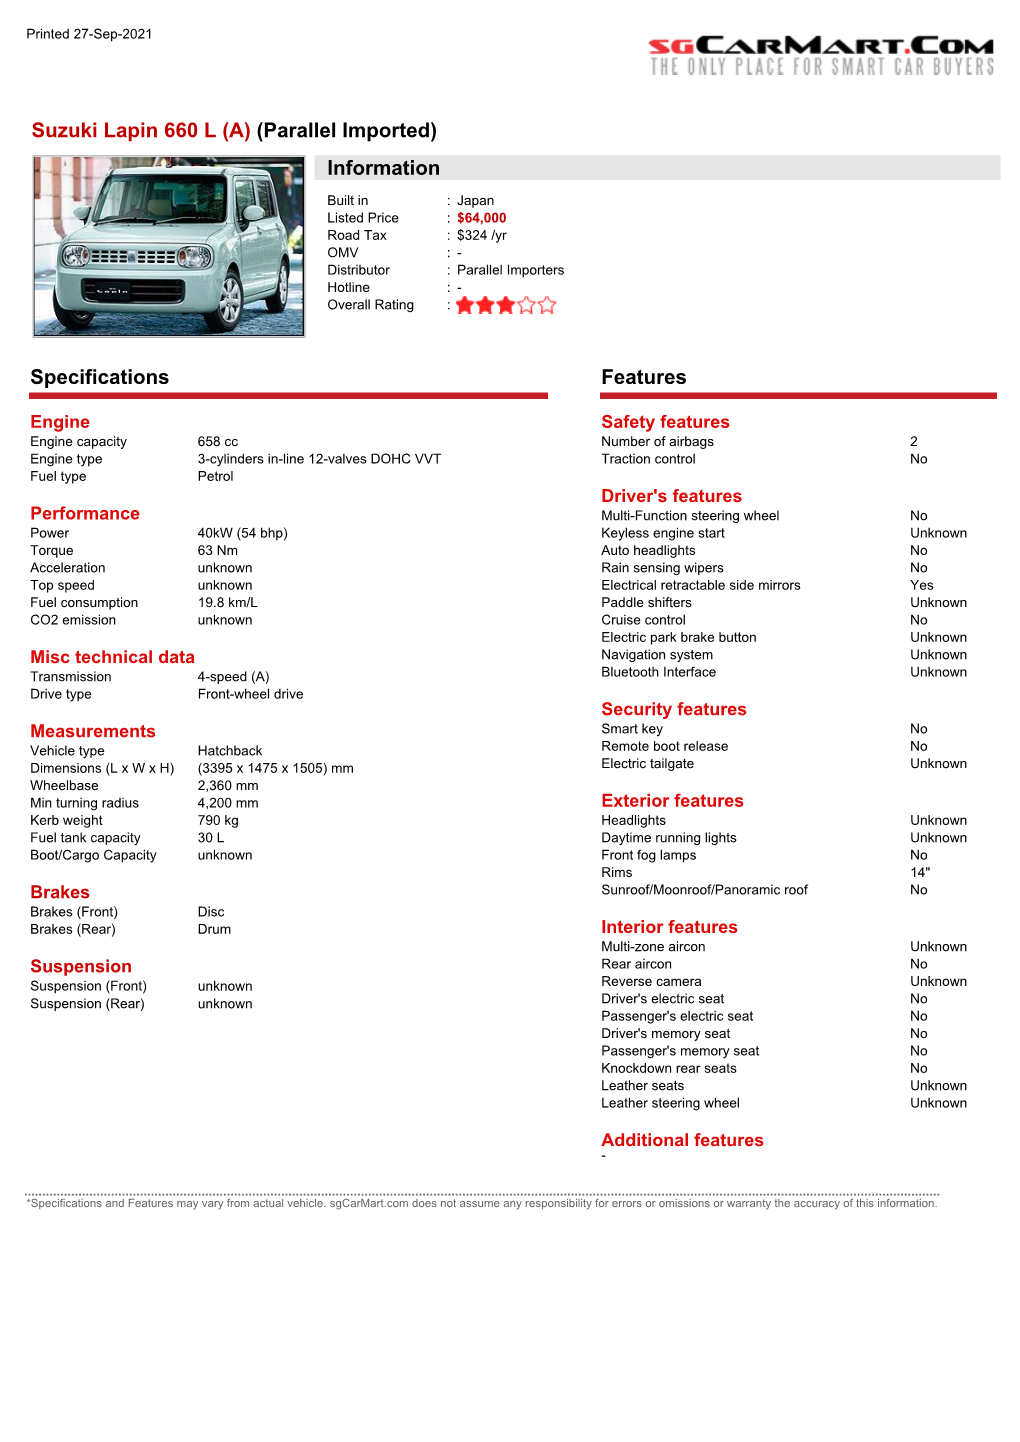 Suzuki Lapin 660 G (A) (Parallel Imported) Information Specifications Features